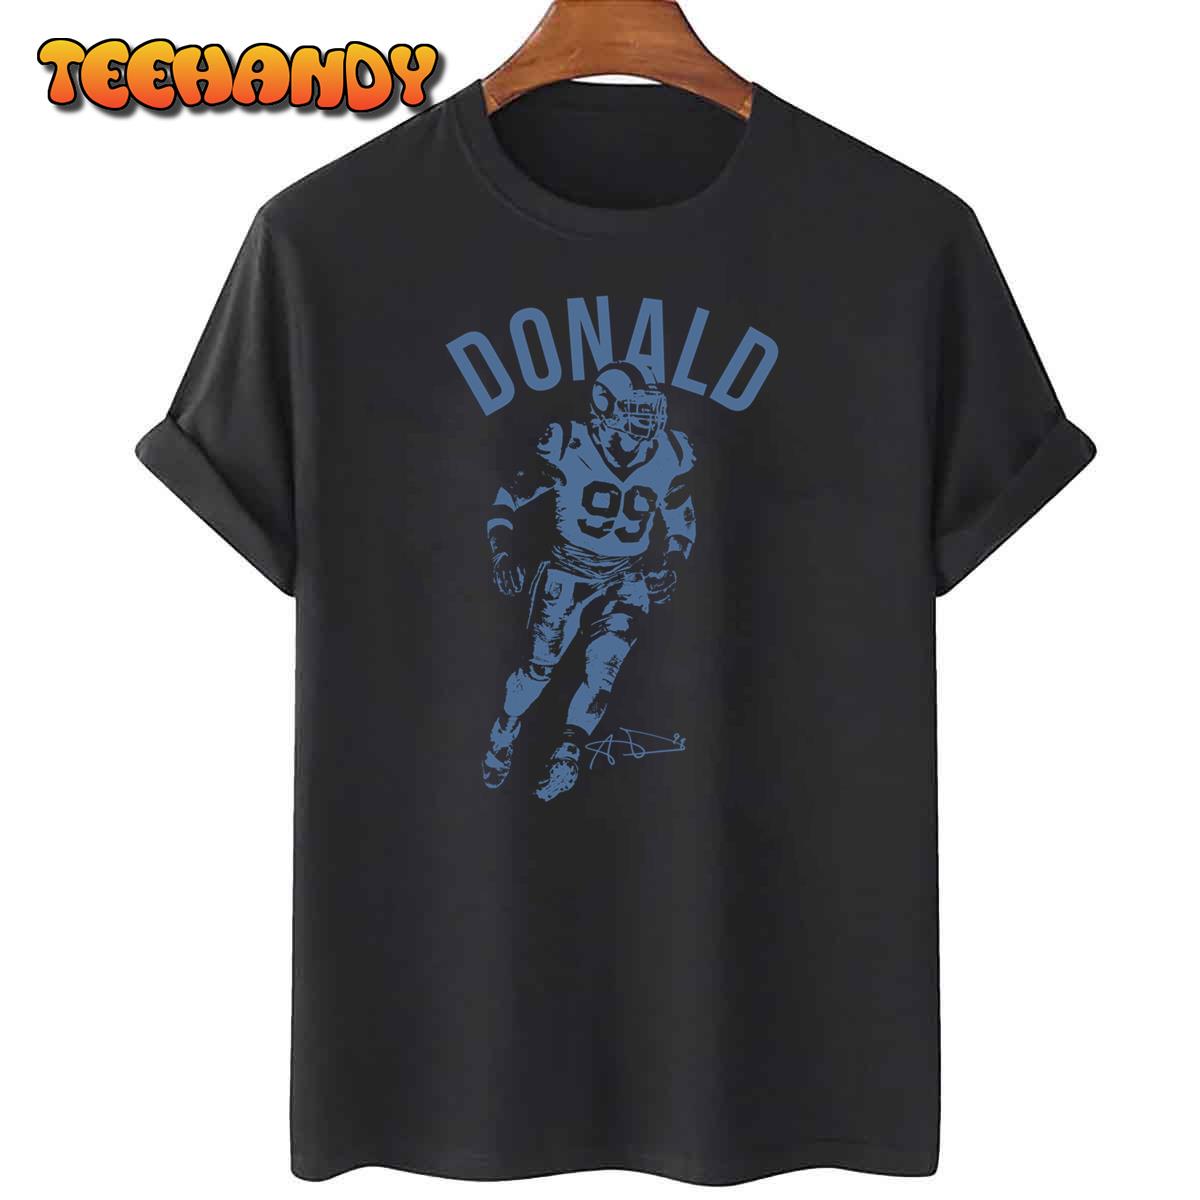 It’s Not All It’s Cracked Up To Be Aaron Donald Unisex T-Shirt